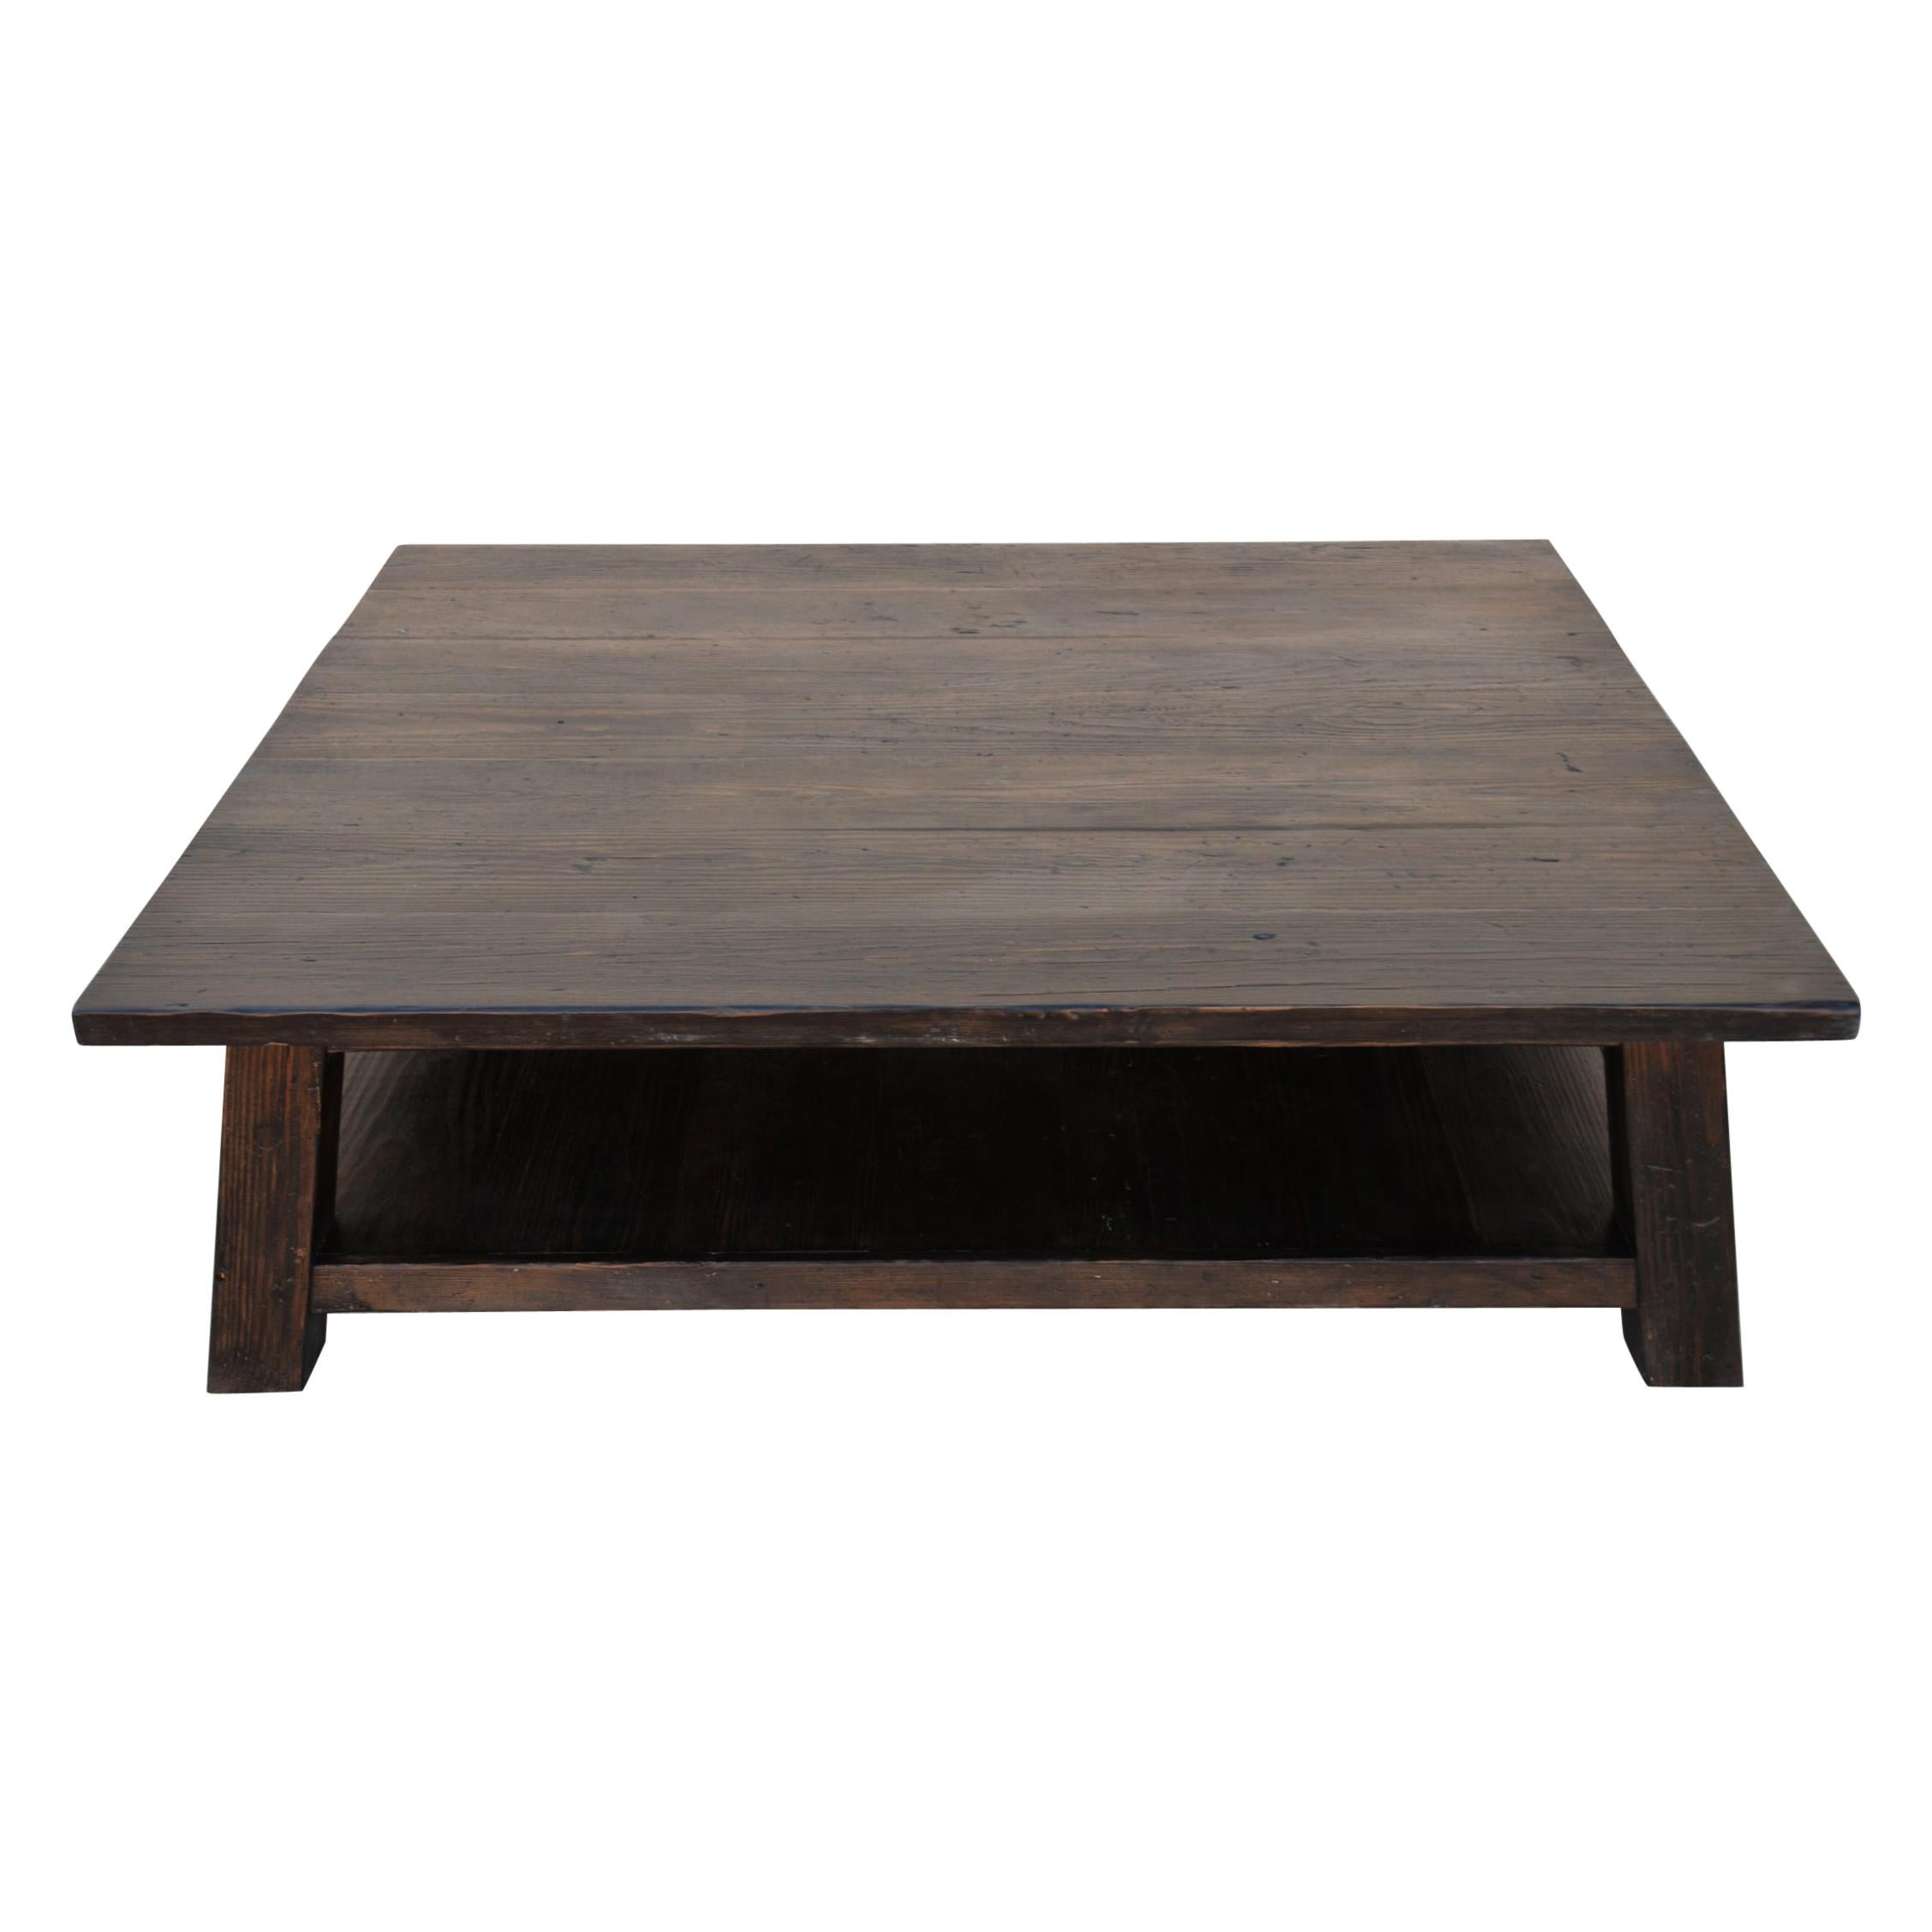 Klara Coffee Table made from Reclaimed Pine For Sale